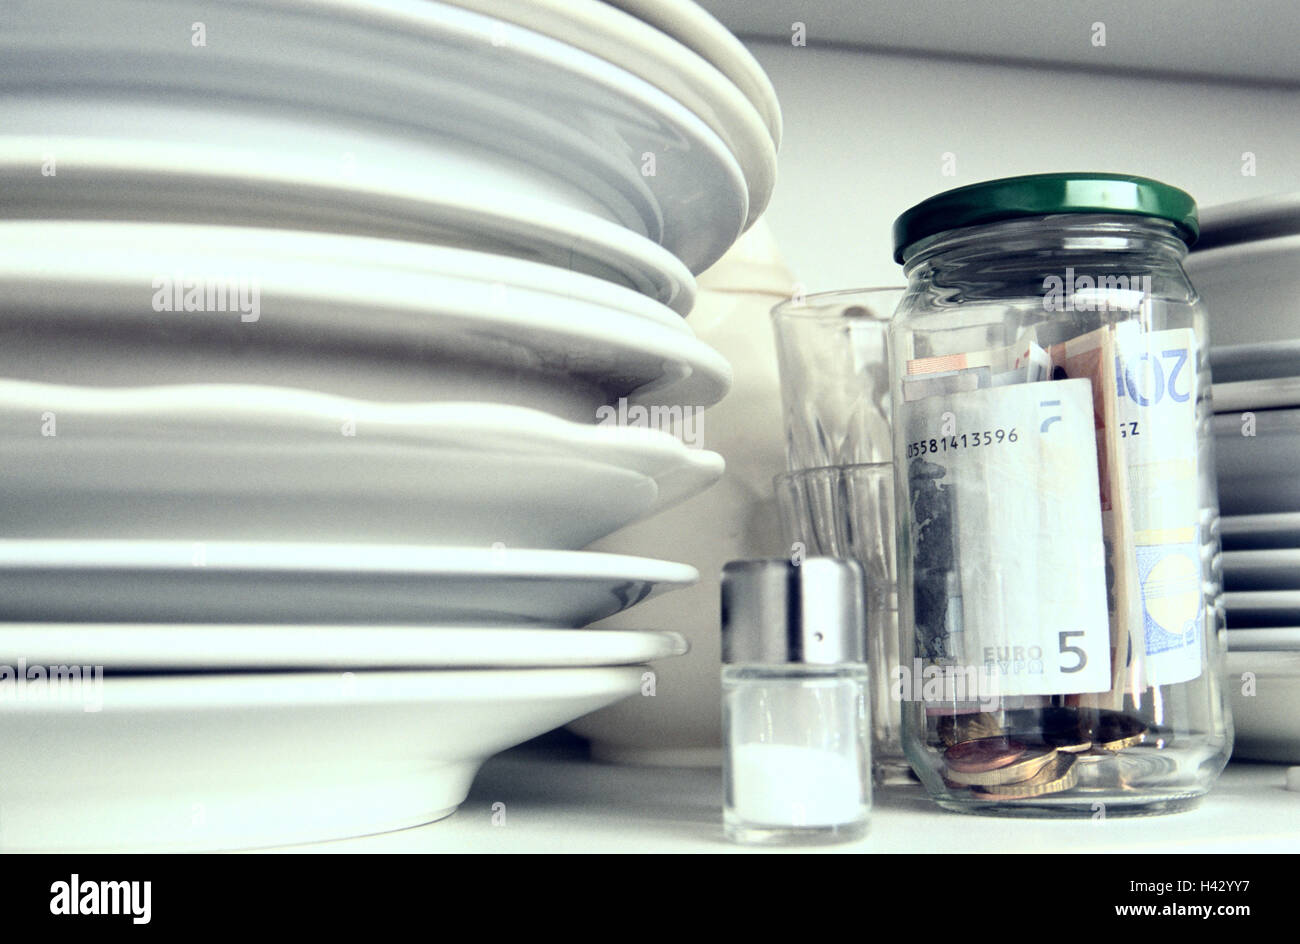 Culinary shelf, plate, glass, screw cap, housekeeping money, detail, cuisine, shelf, cupboard, dishes, dinner set, preserving jar, money, bank notes, banknotes, coins, cash, hides, retention, icon, conception, household, finances, housekeeping, housekeepi Stock Photo